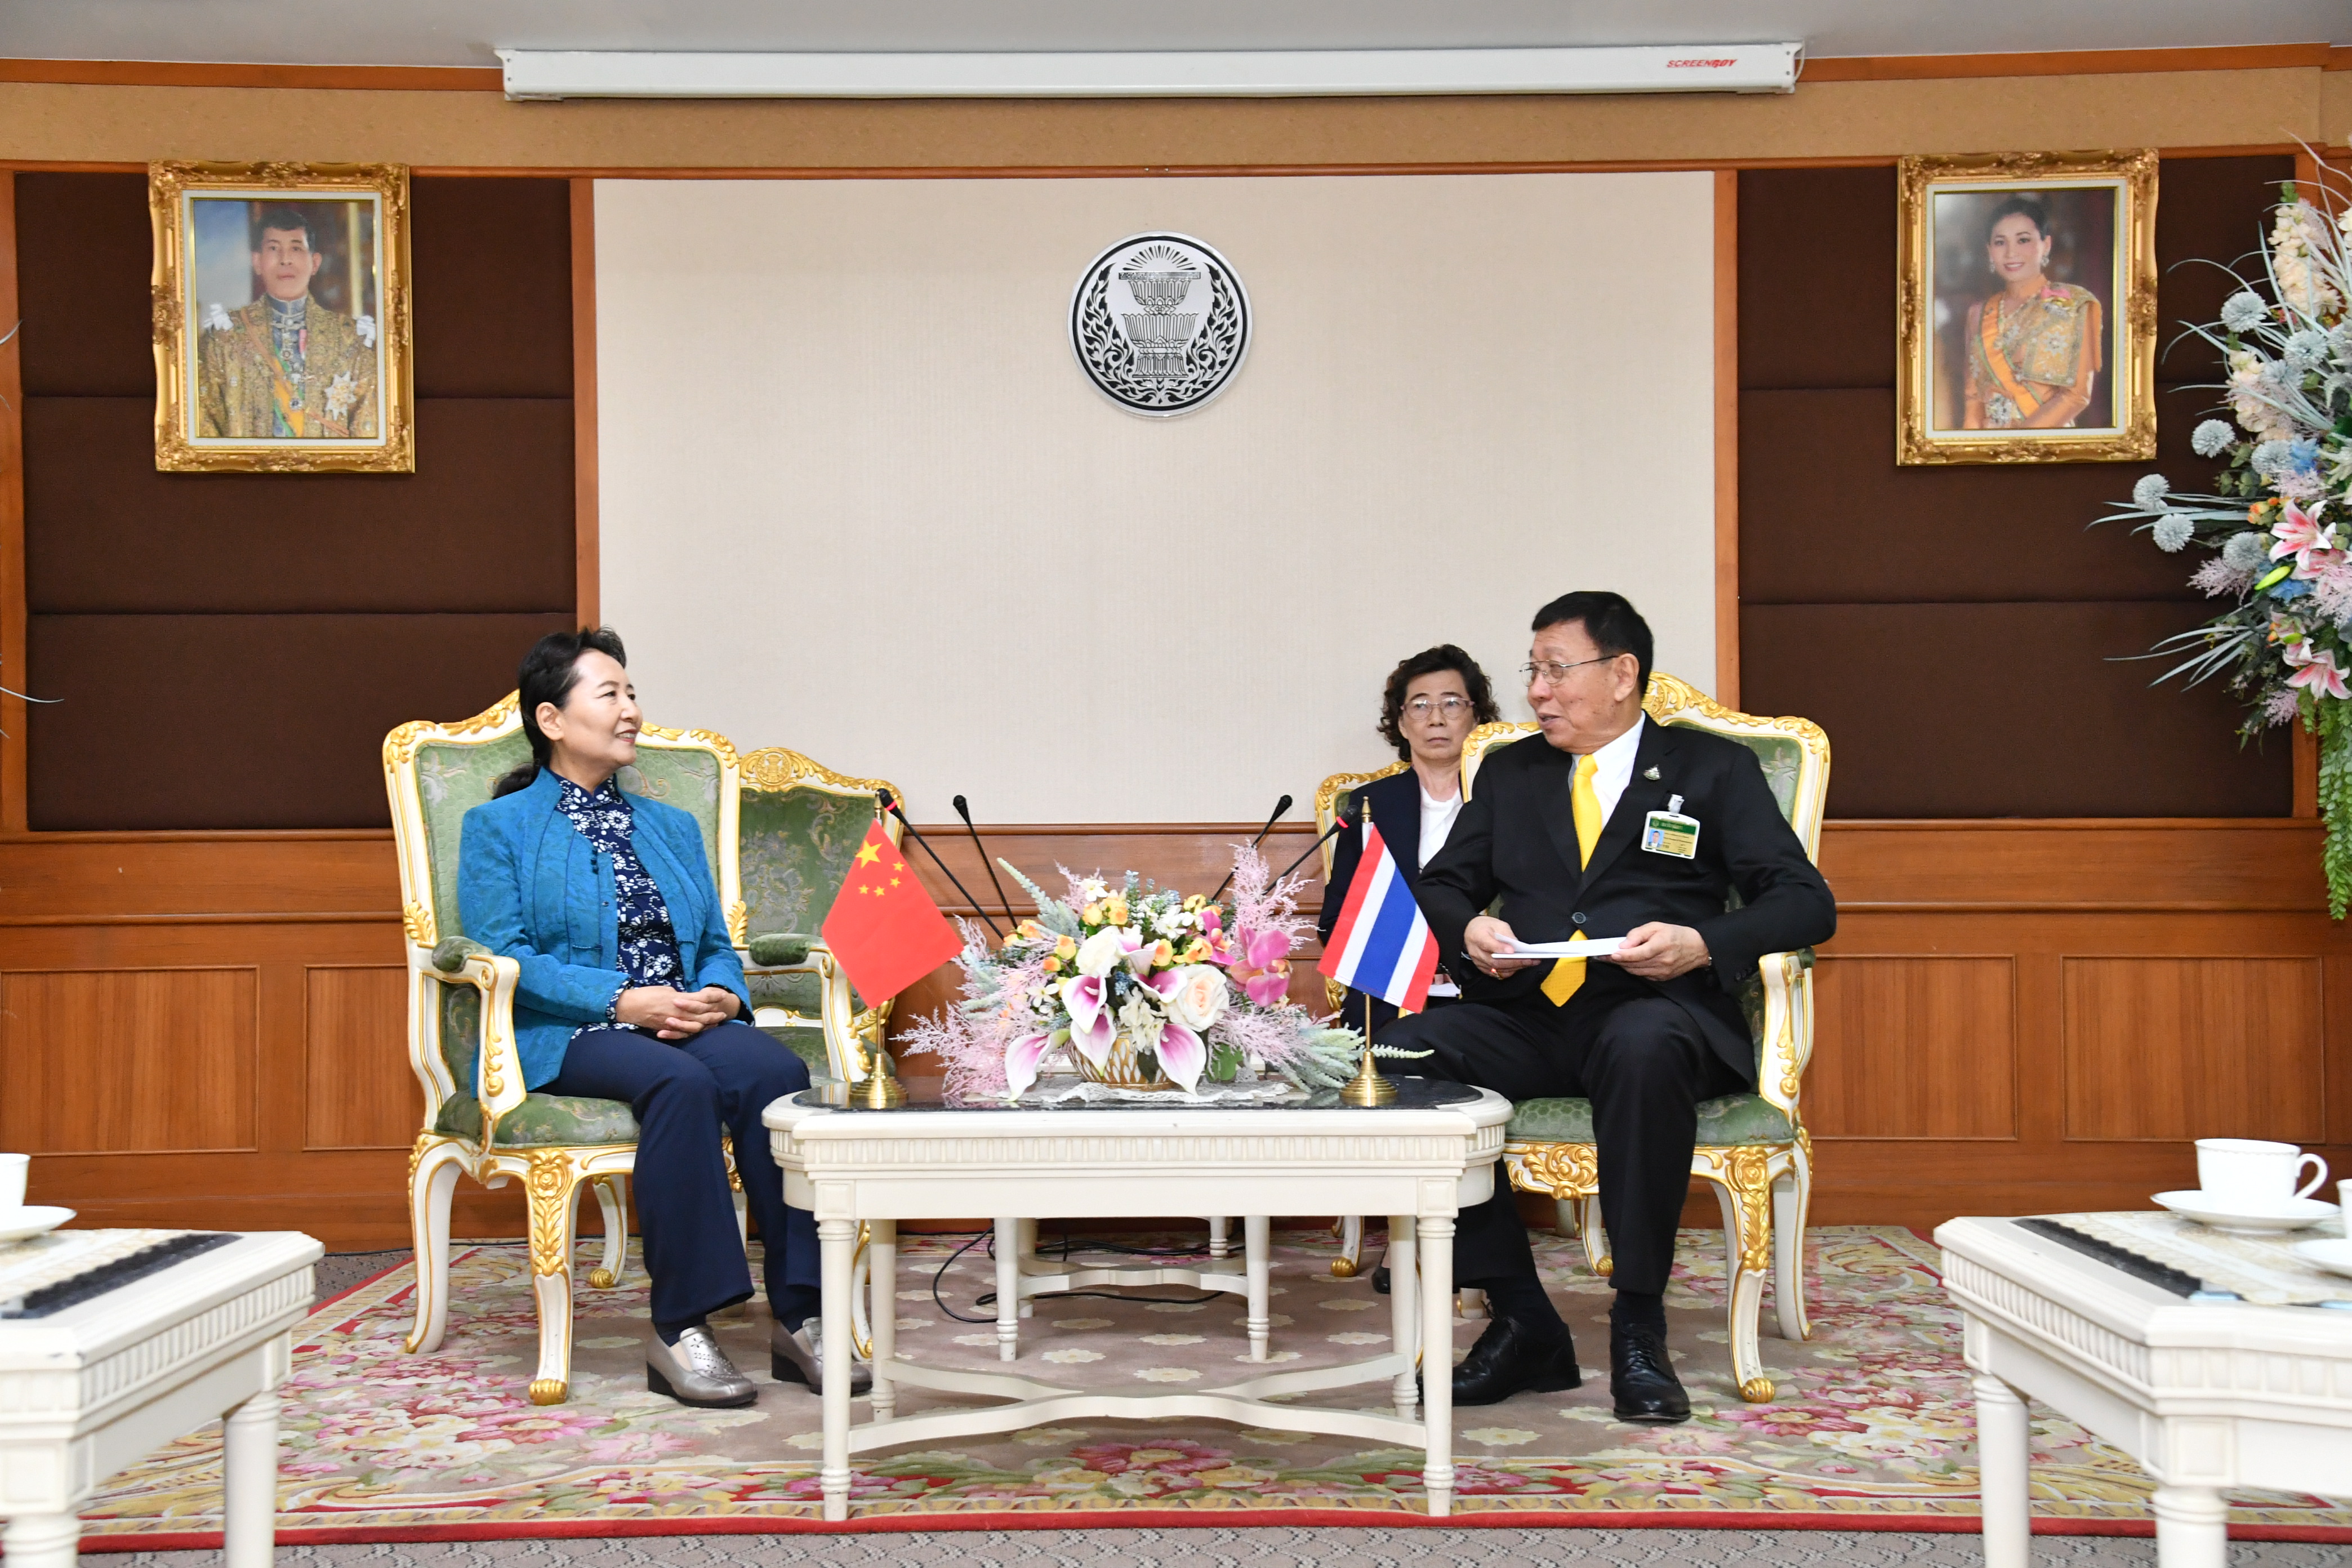 Madam Cui Yuying Chairwoman of the Fujian Provincial Committee of the CPPCC paid a courtesy call on the President of the Senate (11 September 2019)